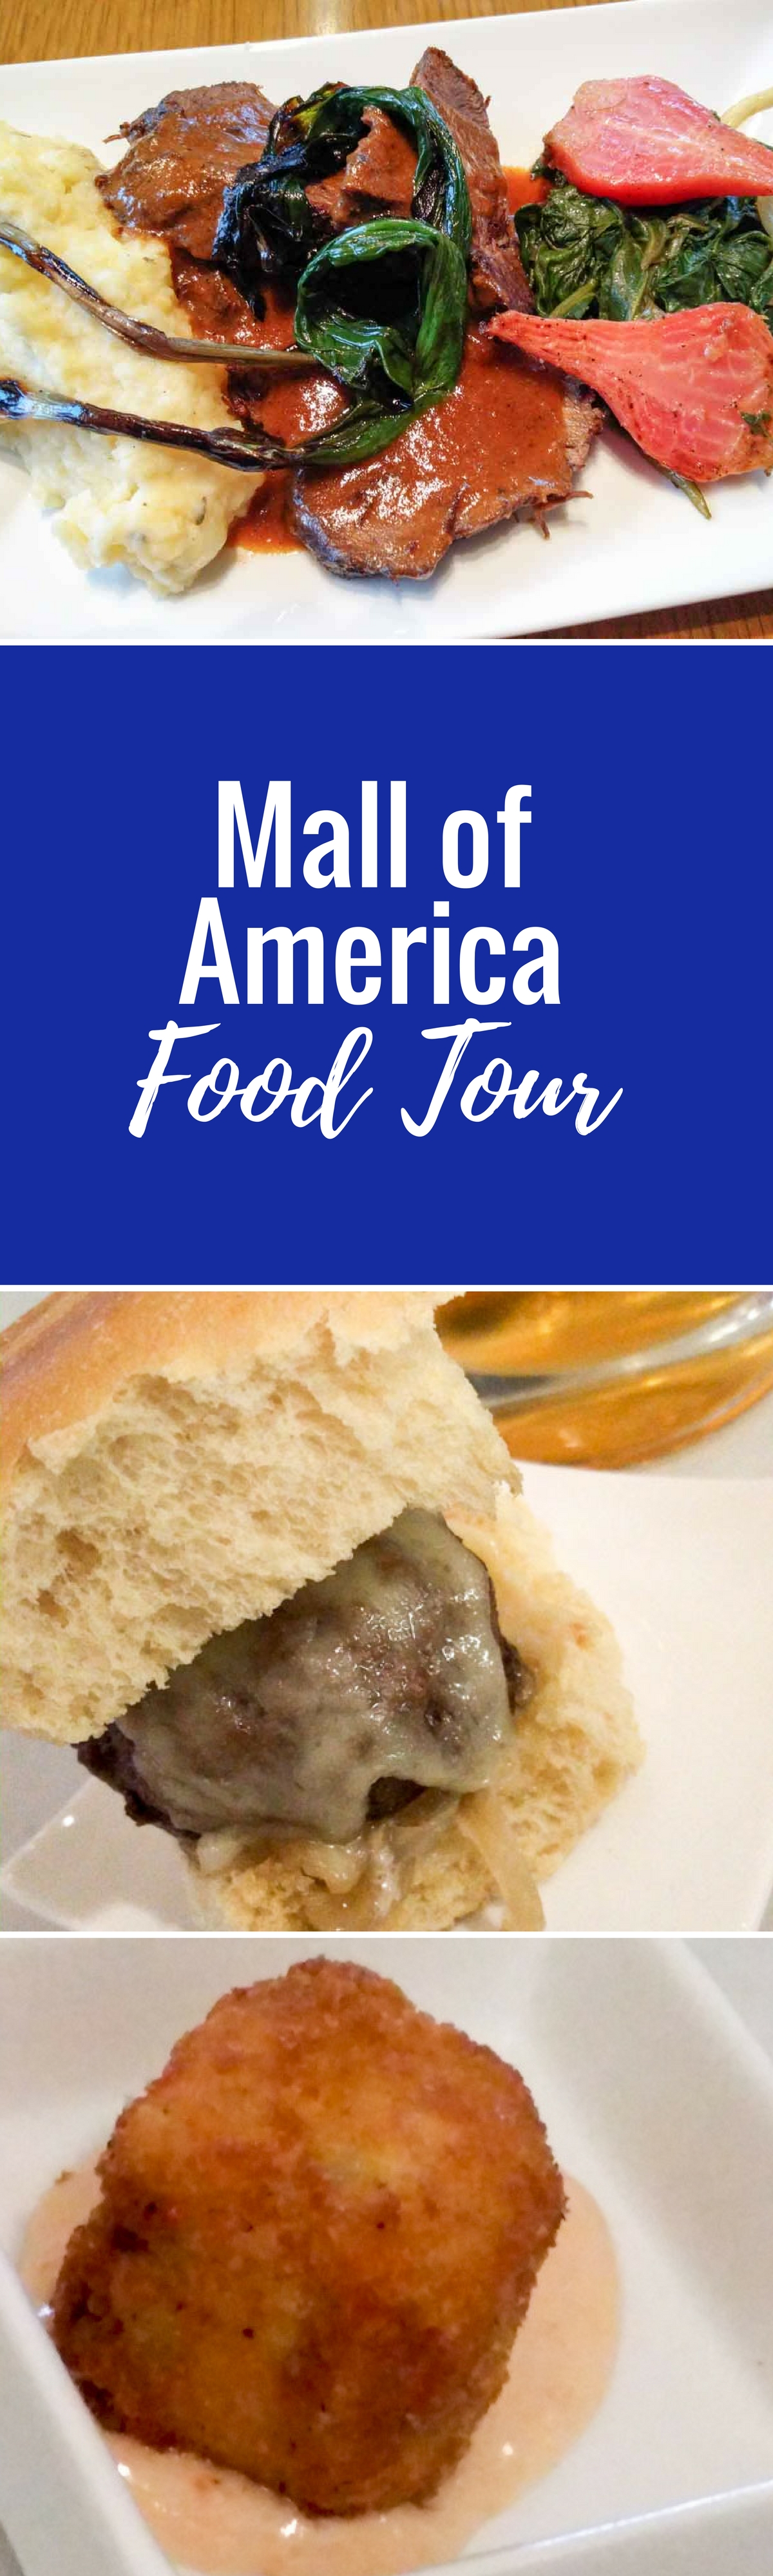 Headed to Mall of America? Do yourself a favor and check out this Mall of America food tour. You want believe how delicious a mall can be!